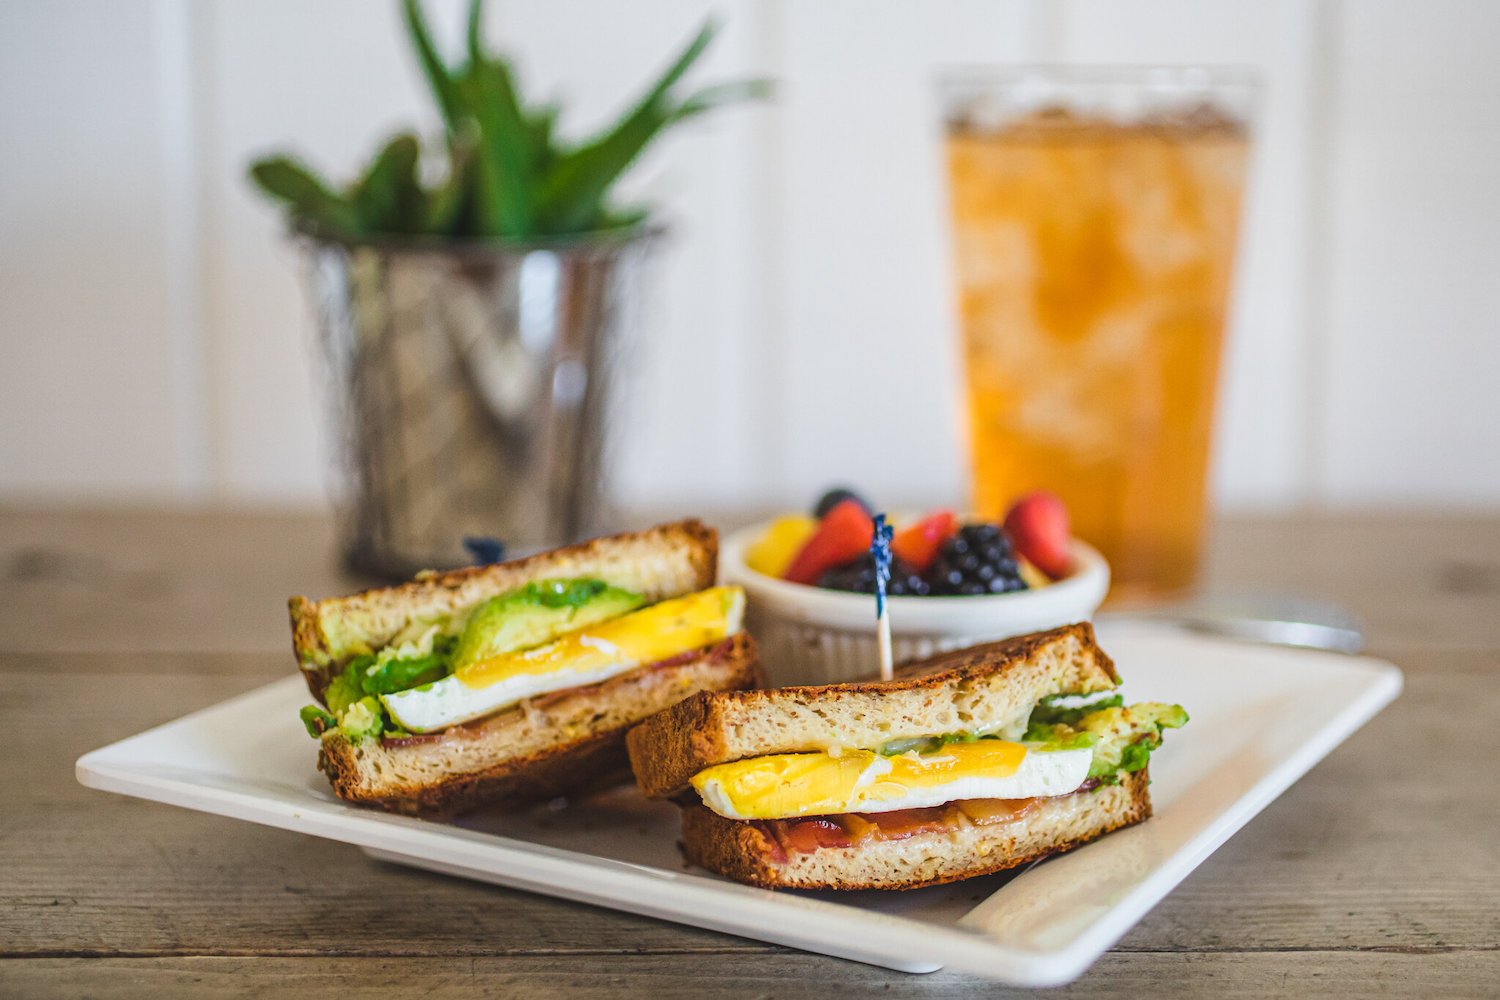 Sunny Side Kitchen in Escondido, ranked by Yelp as one of the best restaurants in San Diego in 2024, featuring an egg sandwich